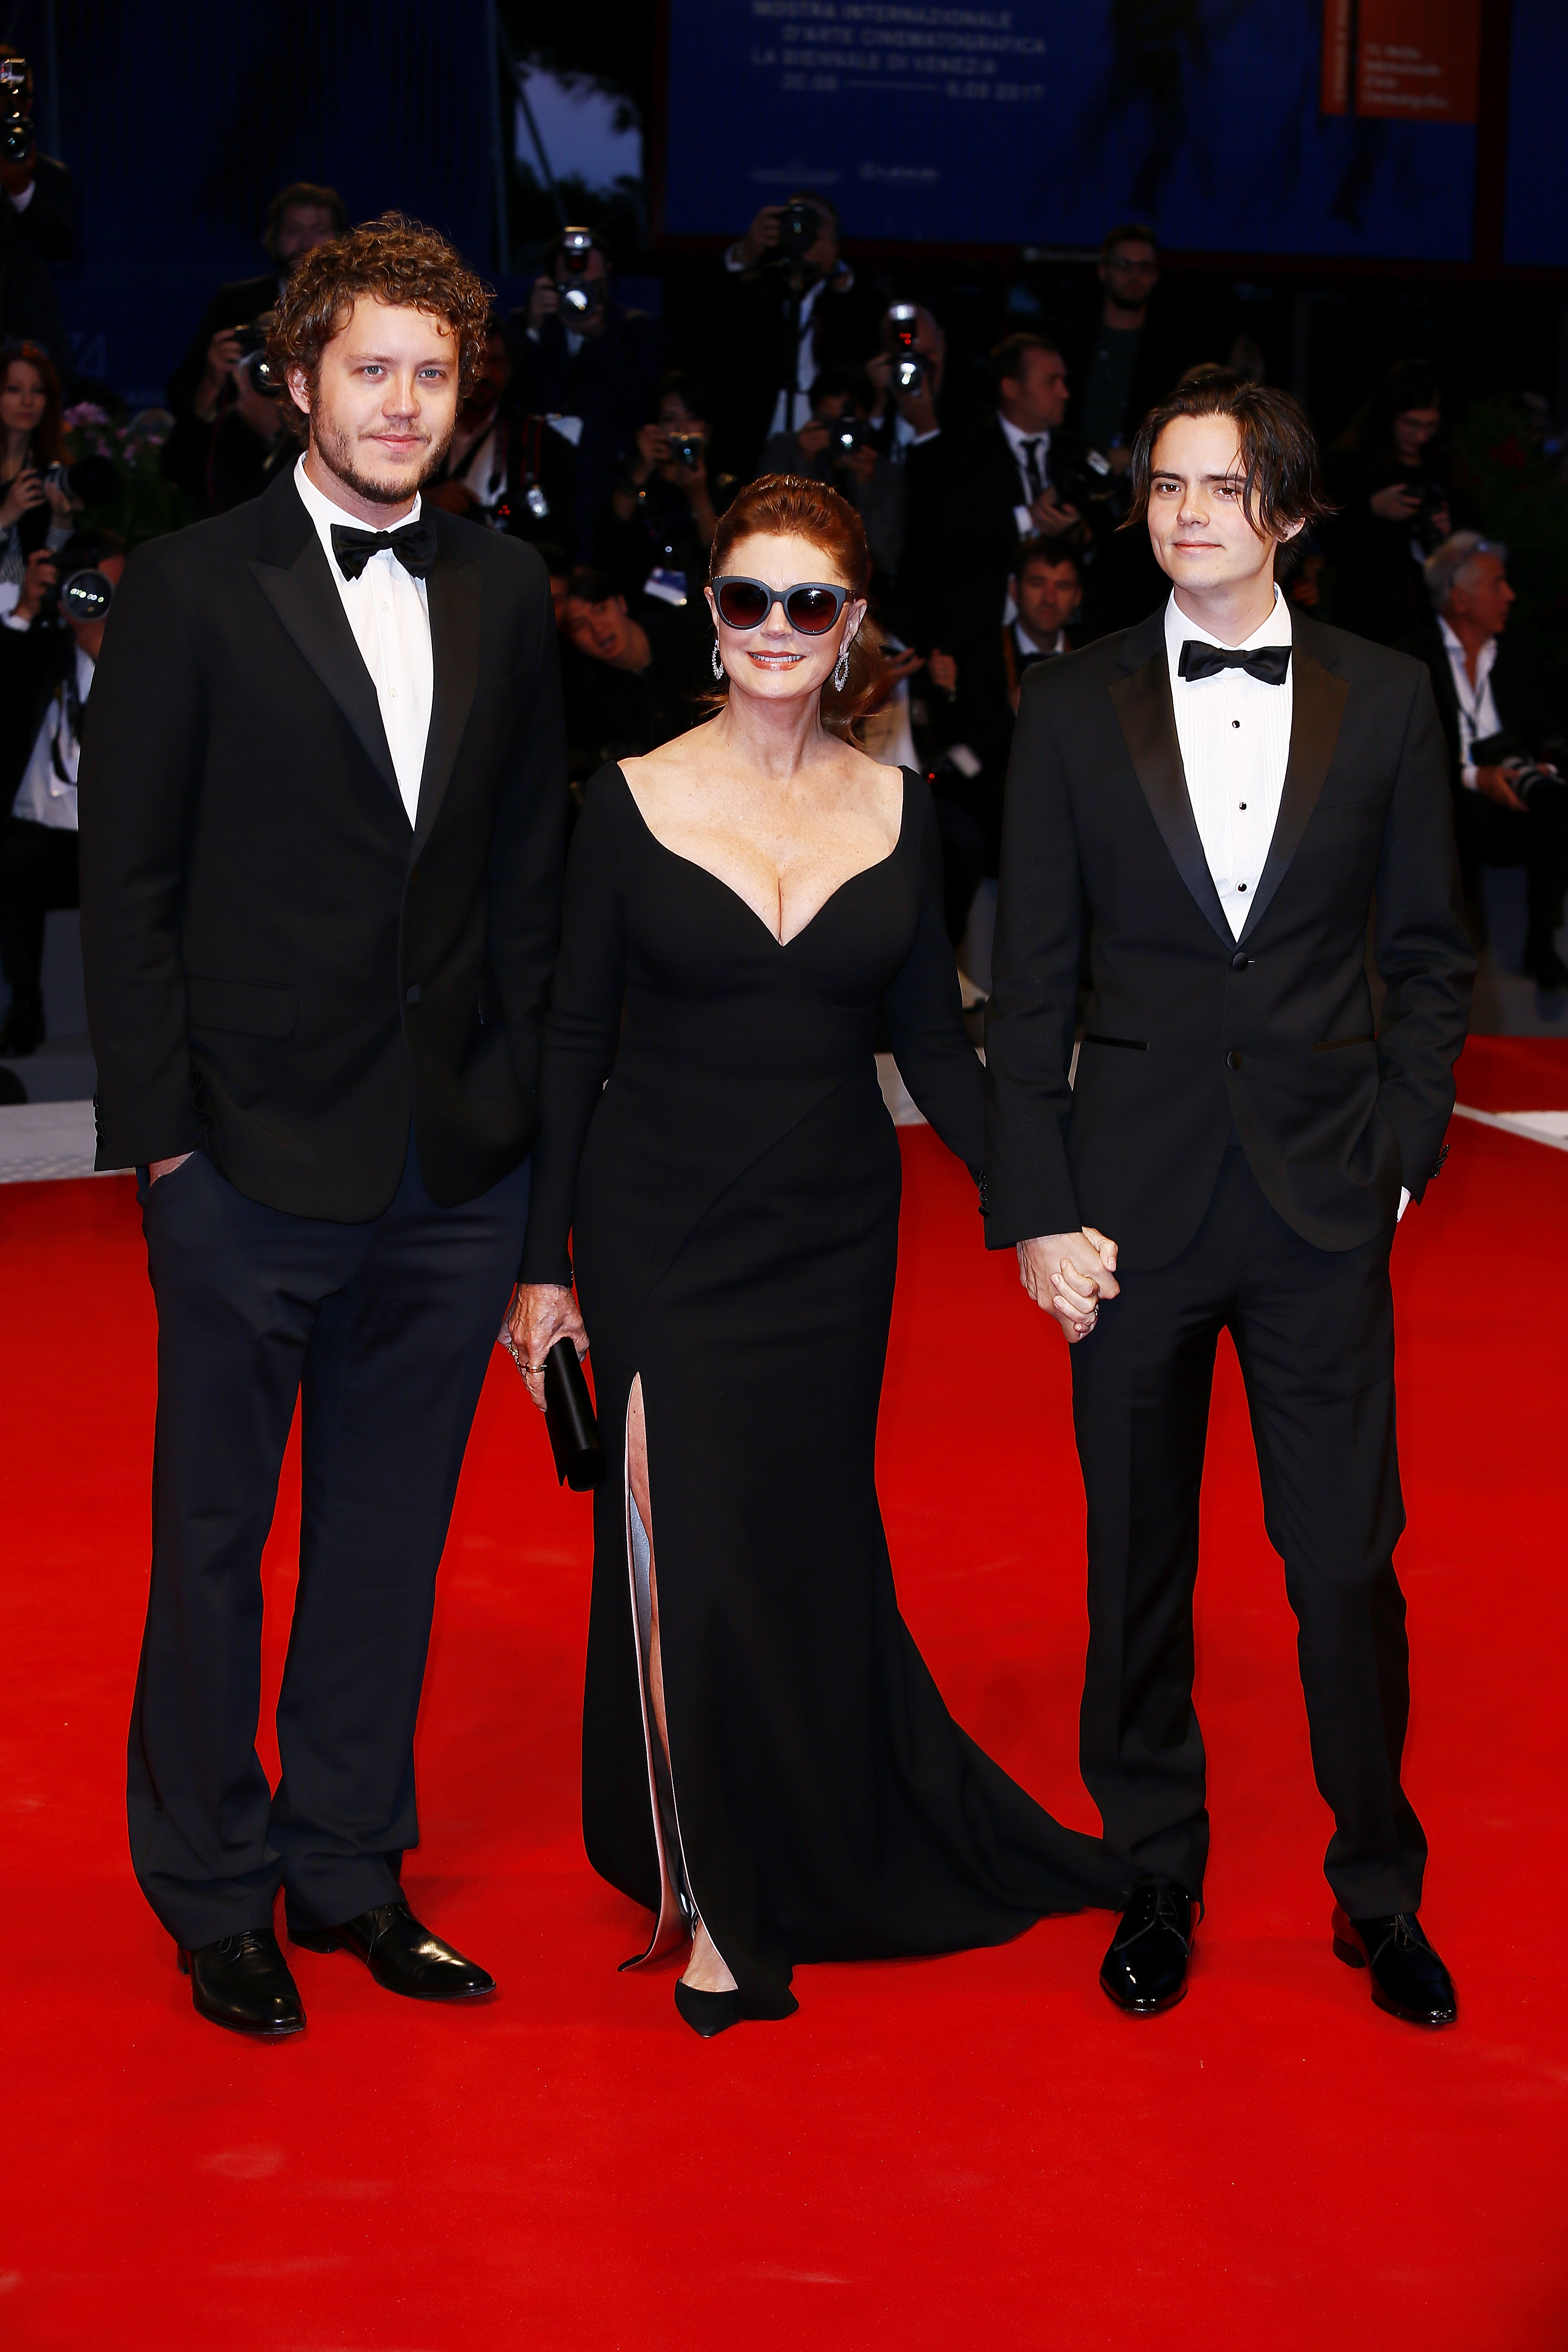 Jack Henry Robbins, Susan Sarandon, and Miles Robbins at the 74th Venice Film Festival in Venice, Italy on September 3, 2017 | Source: Getty Images